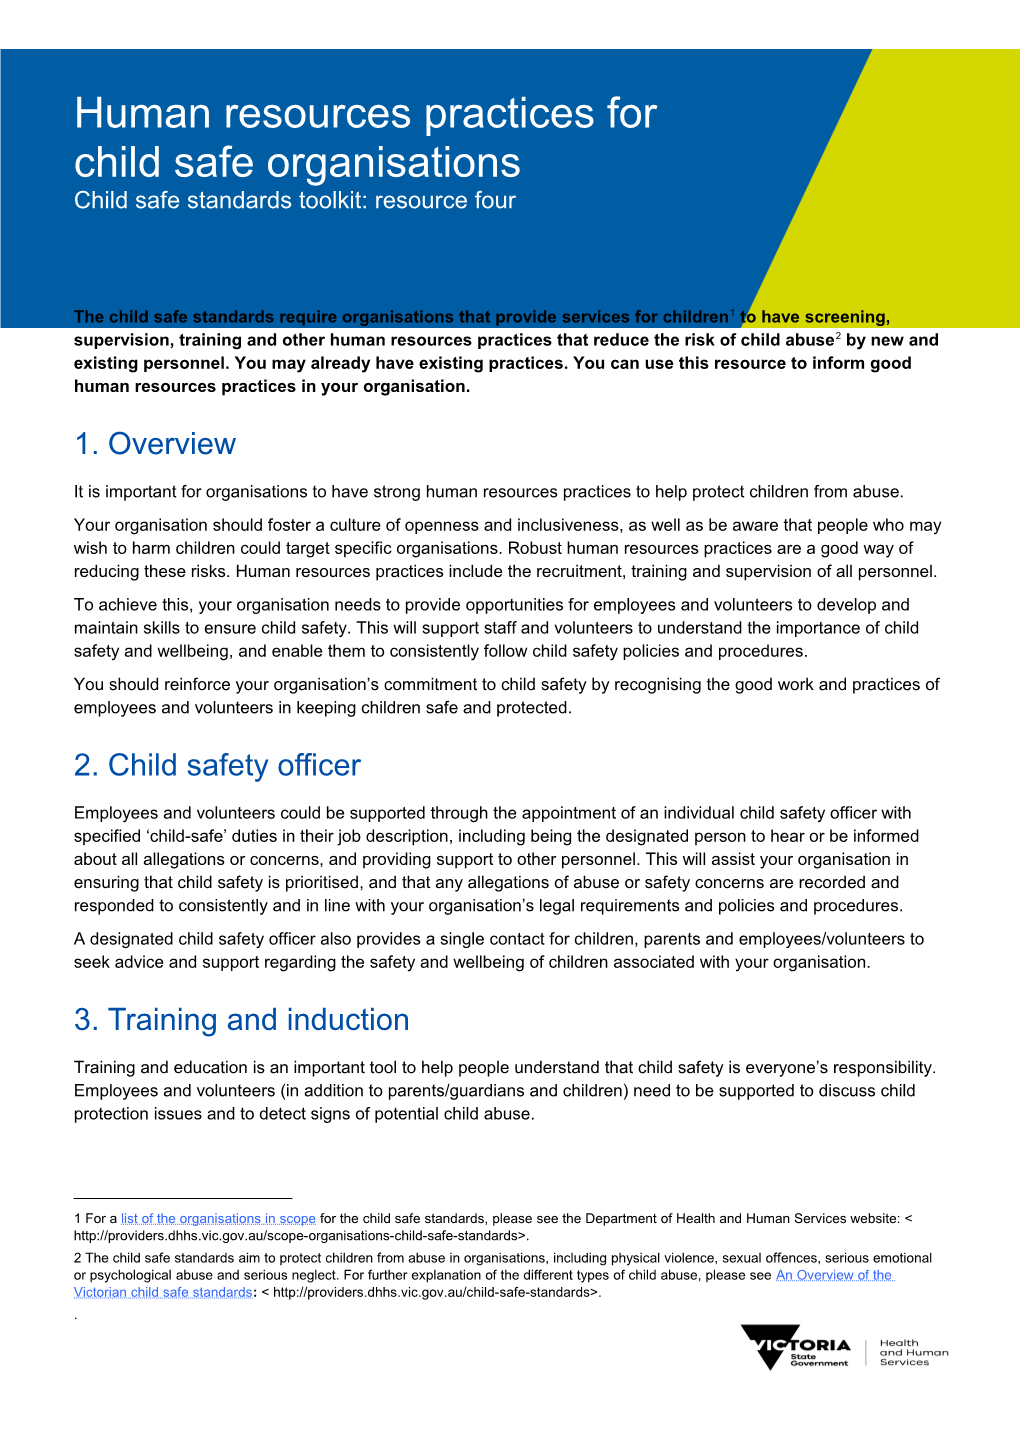 Human Resources Practices for Child Safe Organisations: Child Safe Standards Toolkit: Resource 4